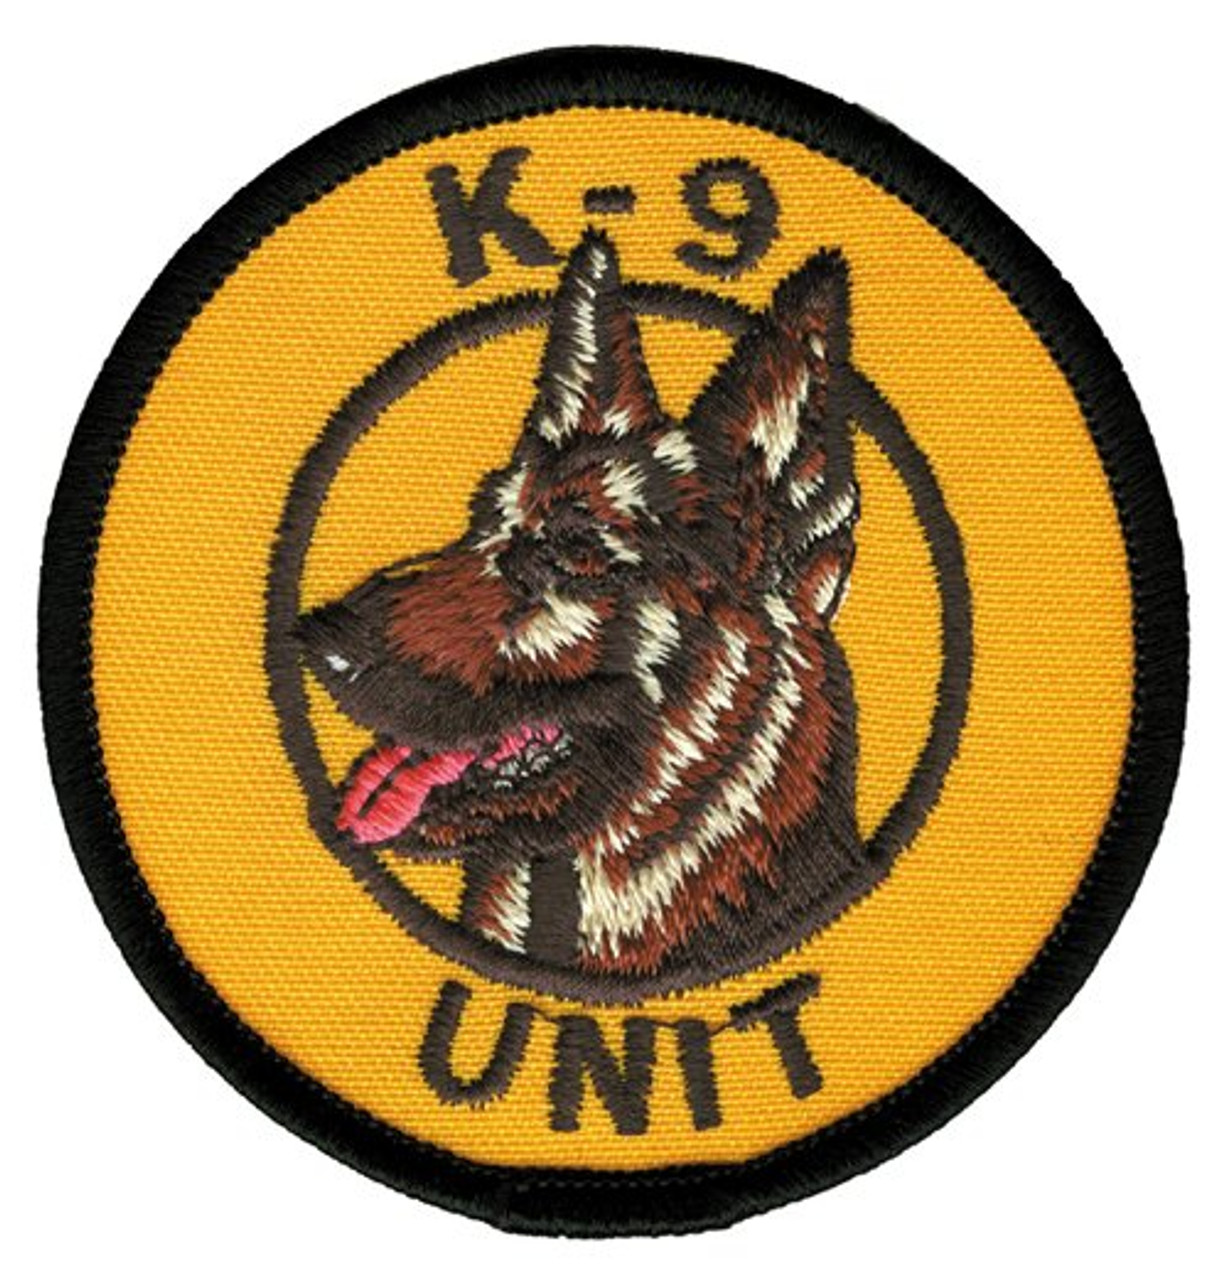 k9 harness SERVICE DOG police k-9 embroidered nylon embroidery fastener patch 